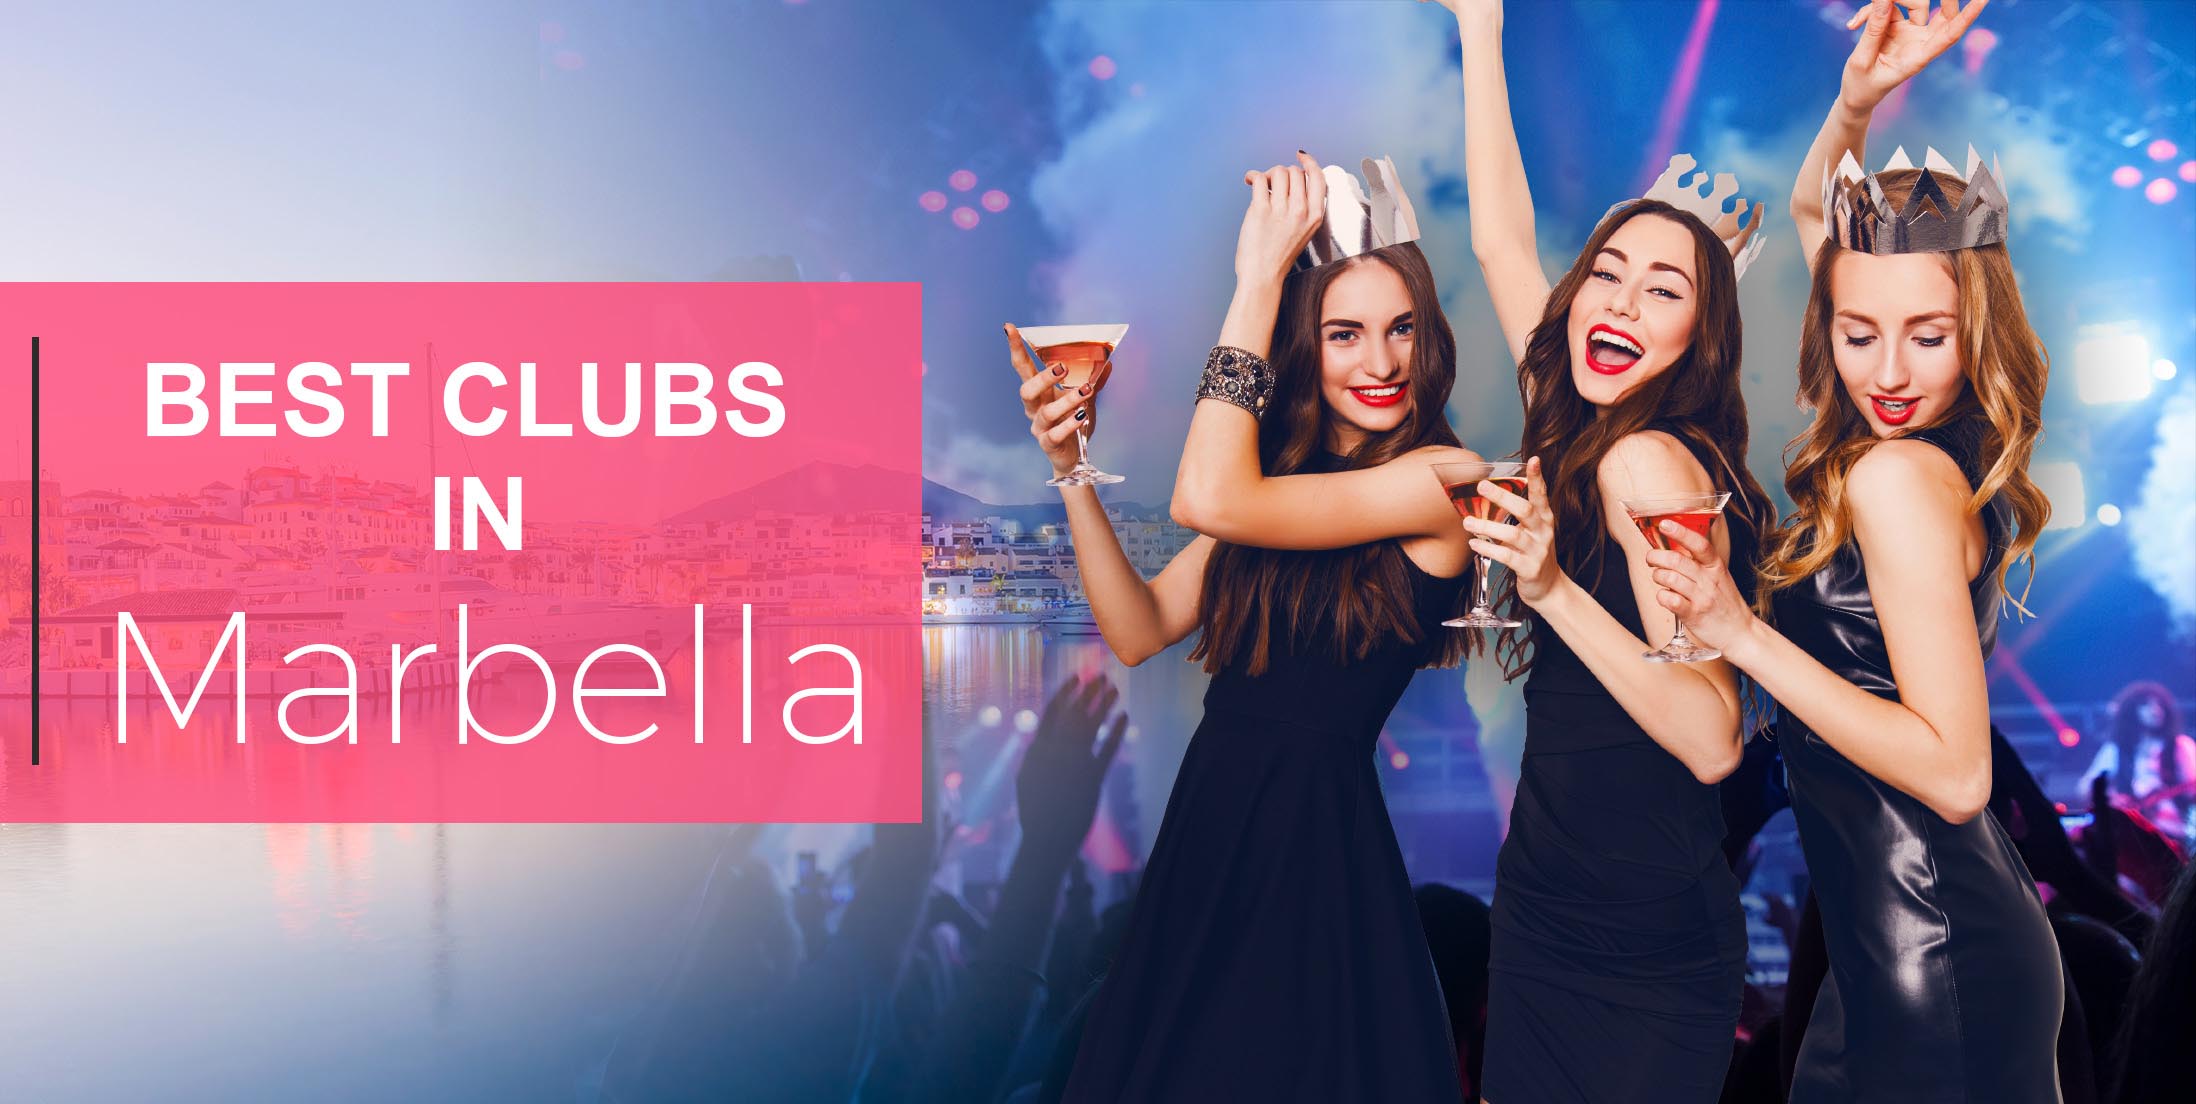 Best Clubs in Marbella